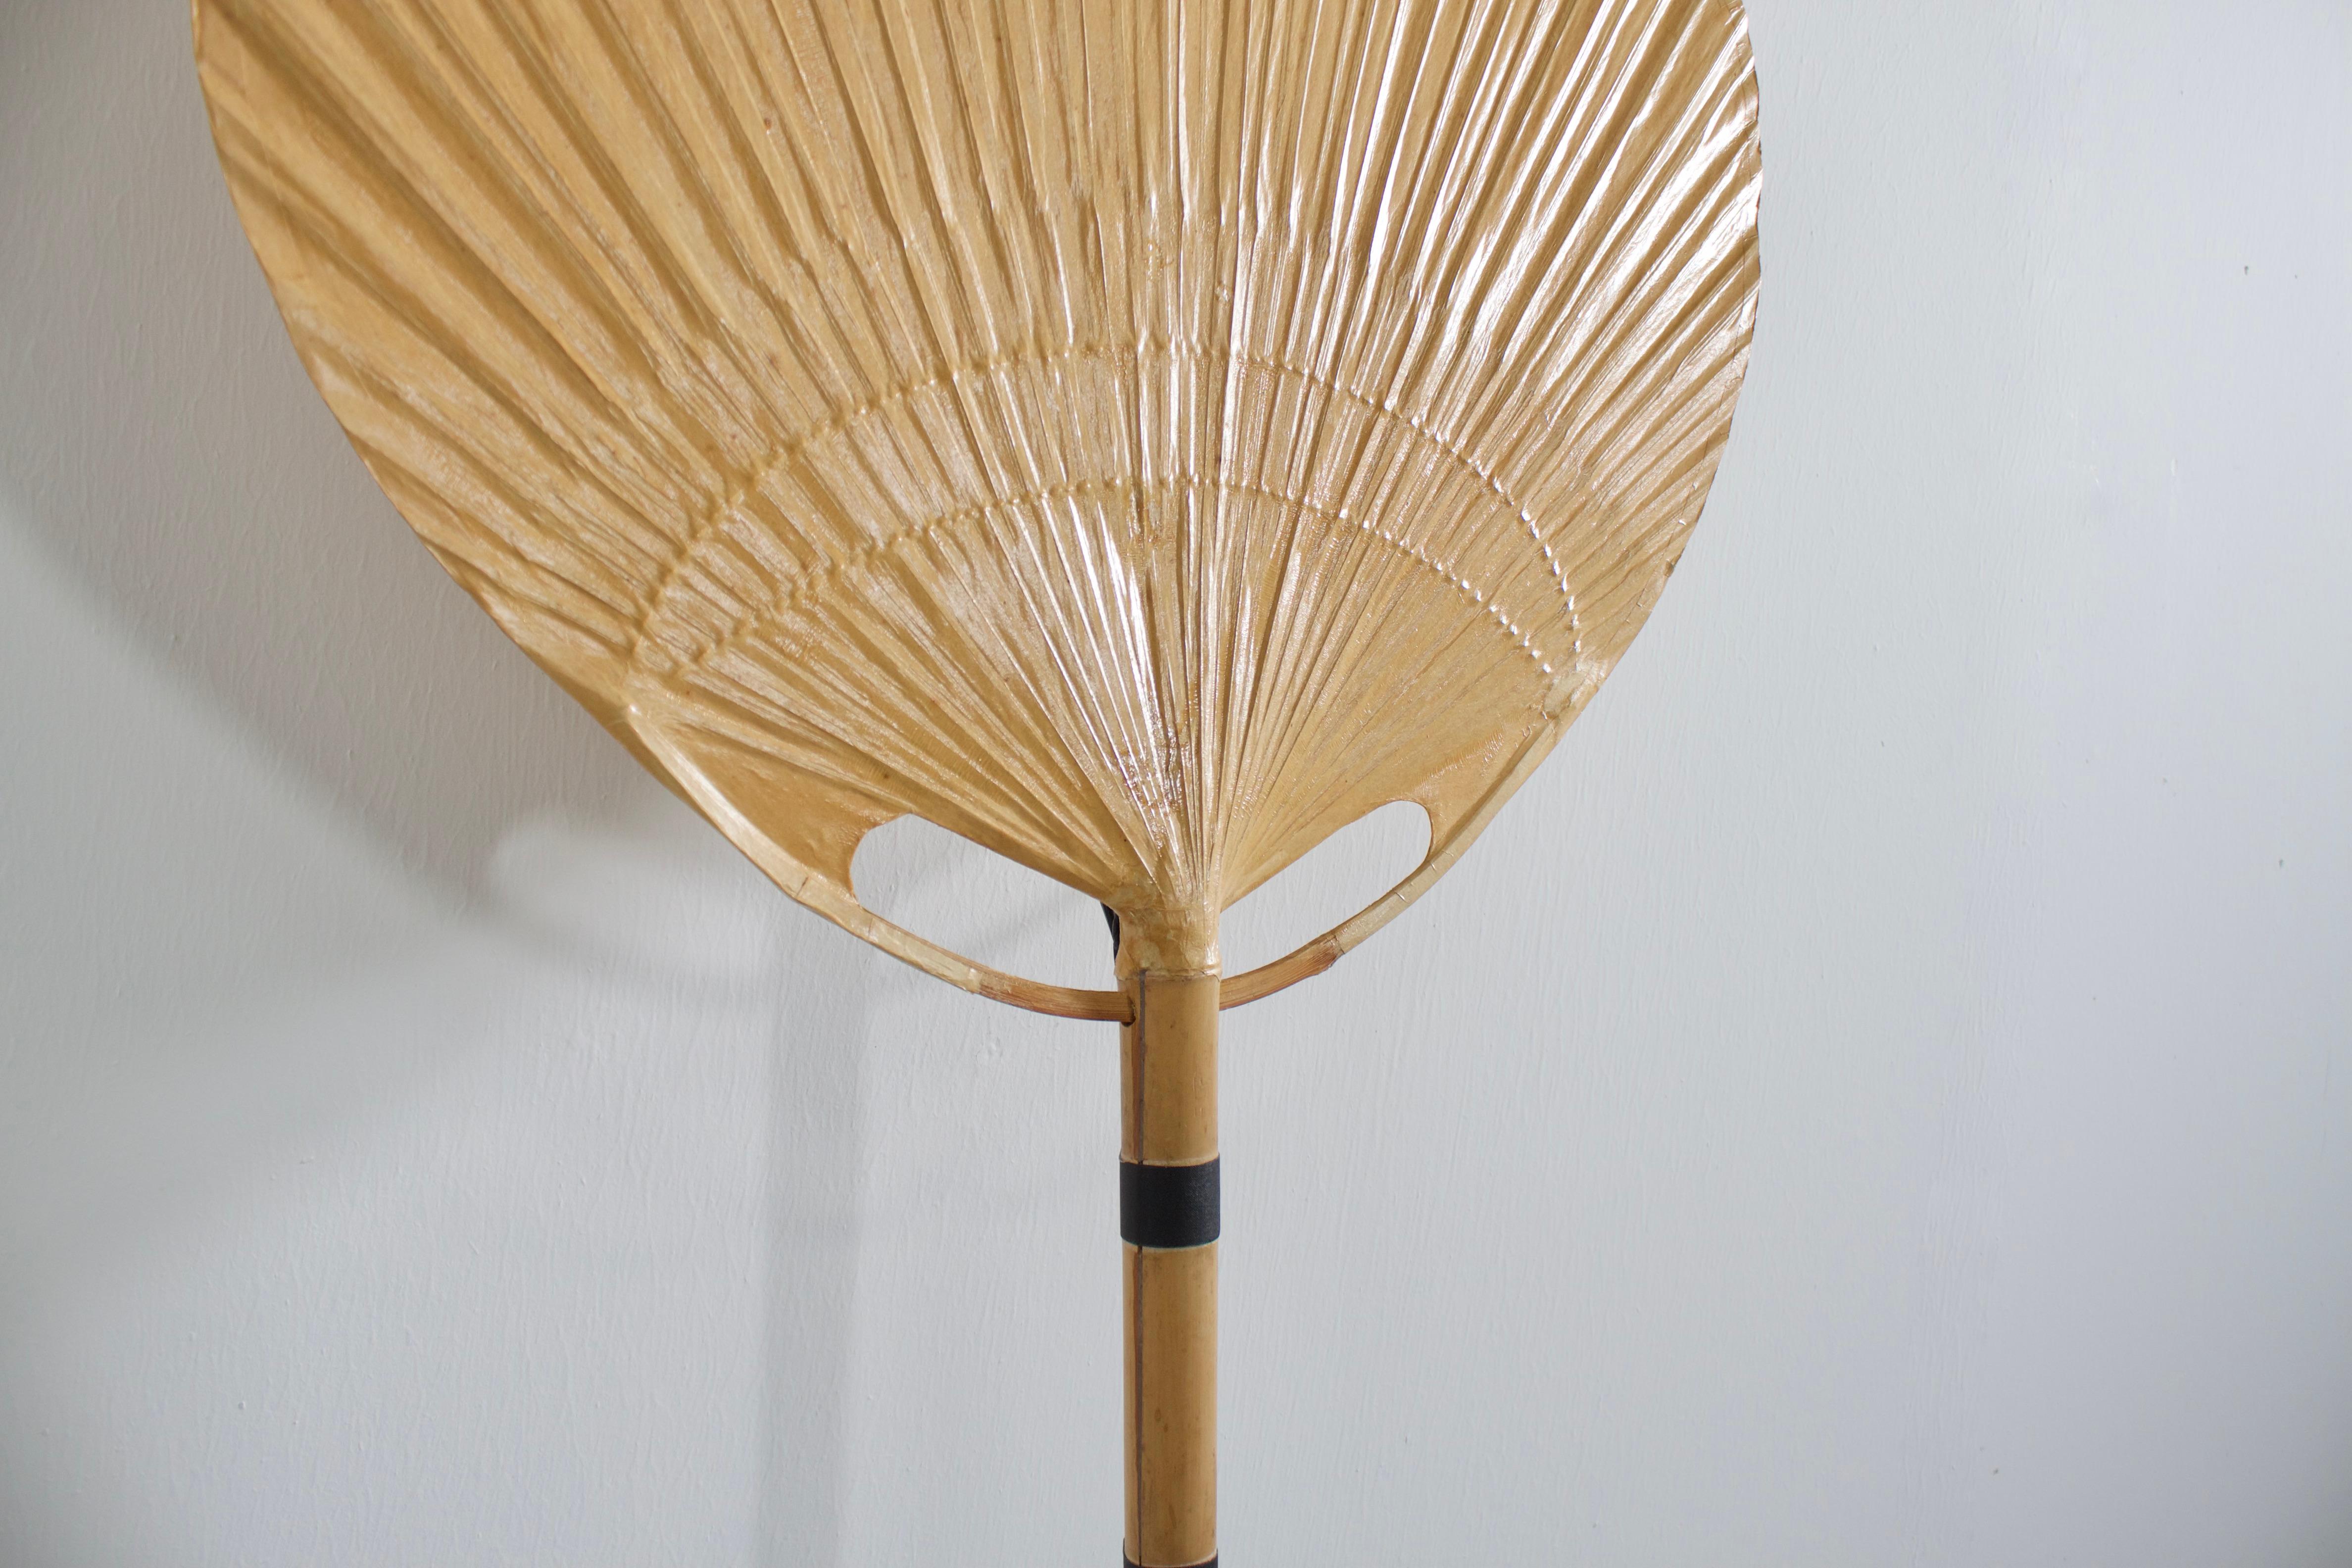 Uchiwa fan wall lamp by Ingo Maurer in very good condition. 

Designed by Ingo Maurer for M design, Germany. 

This lamp was handmade in 1977 from bamboo, wicker and Japanese rice paper. 

It is very fragile and therefor very hard to find in